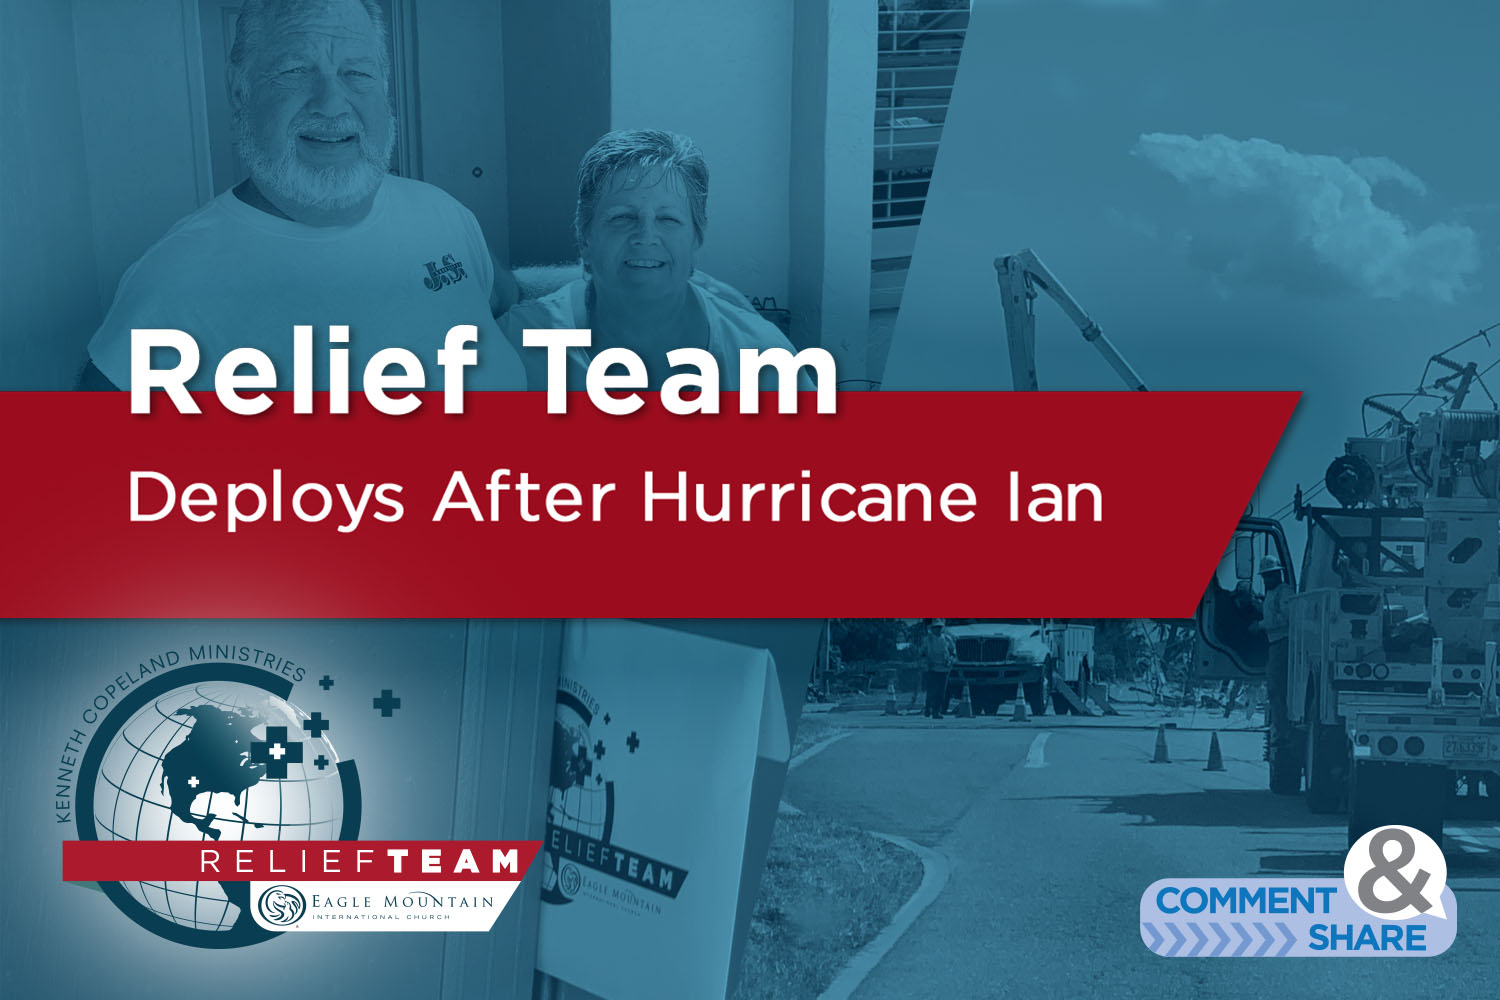 Relief Team Deploys After Hurricane Ian